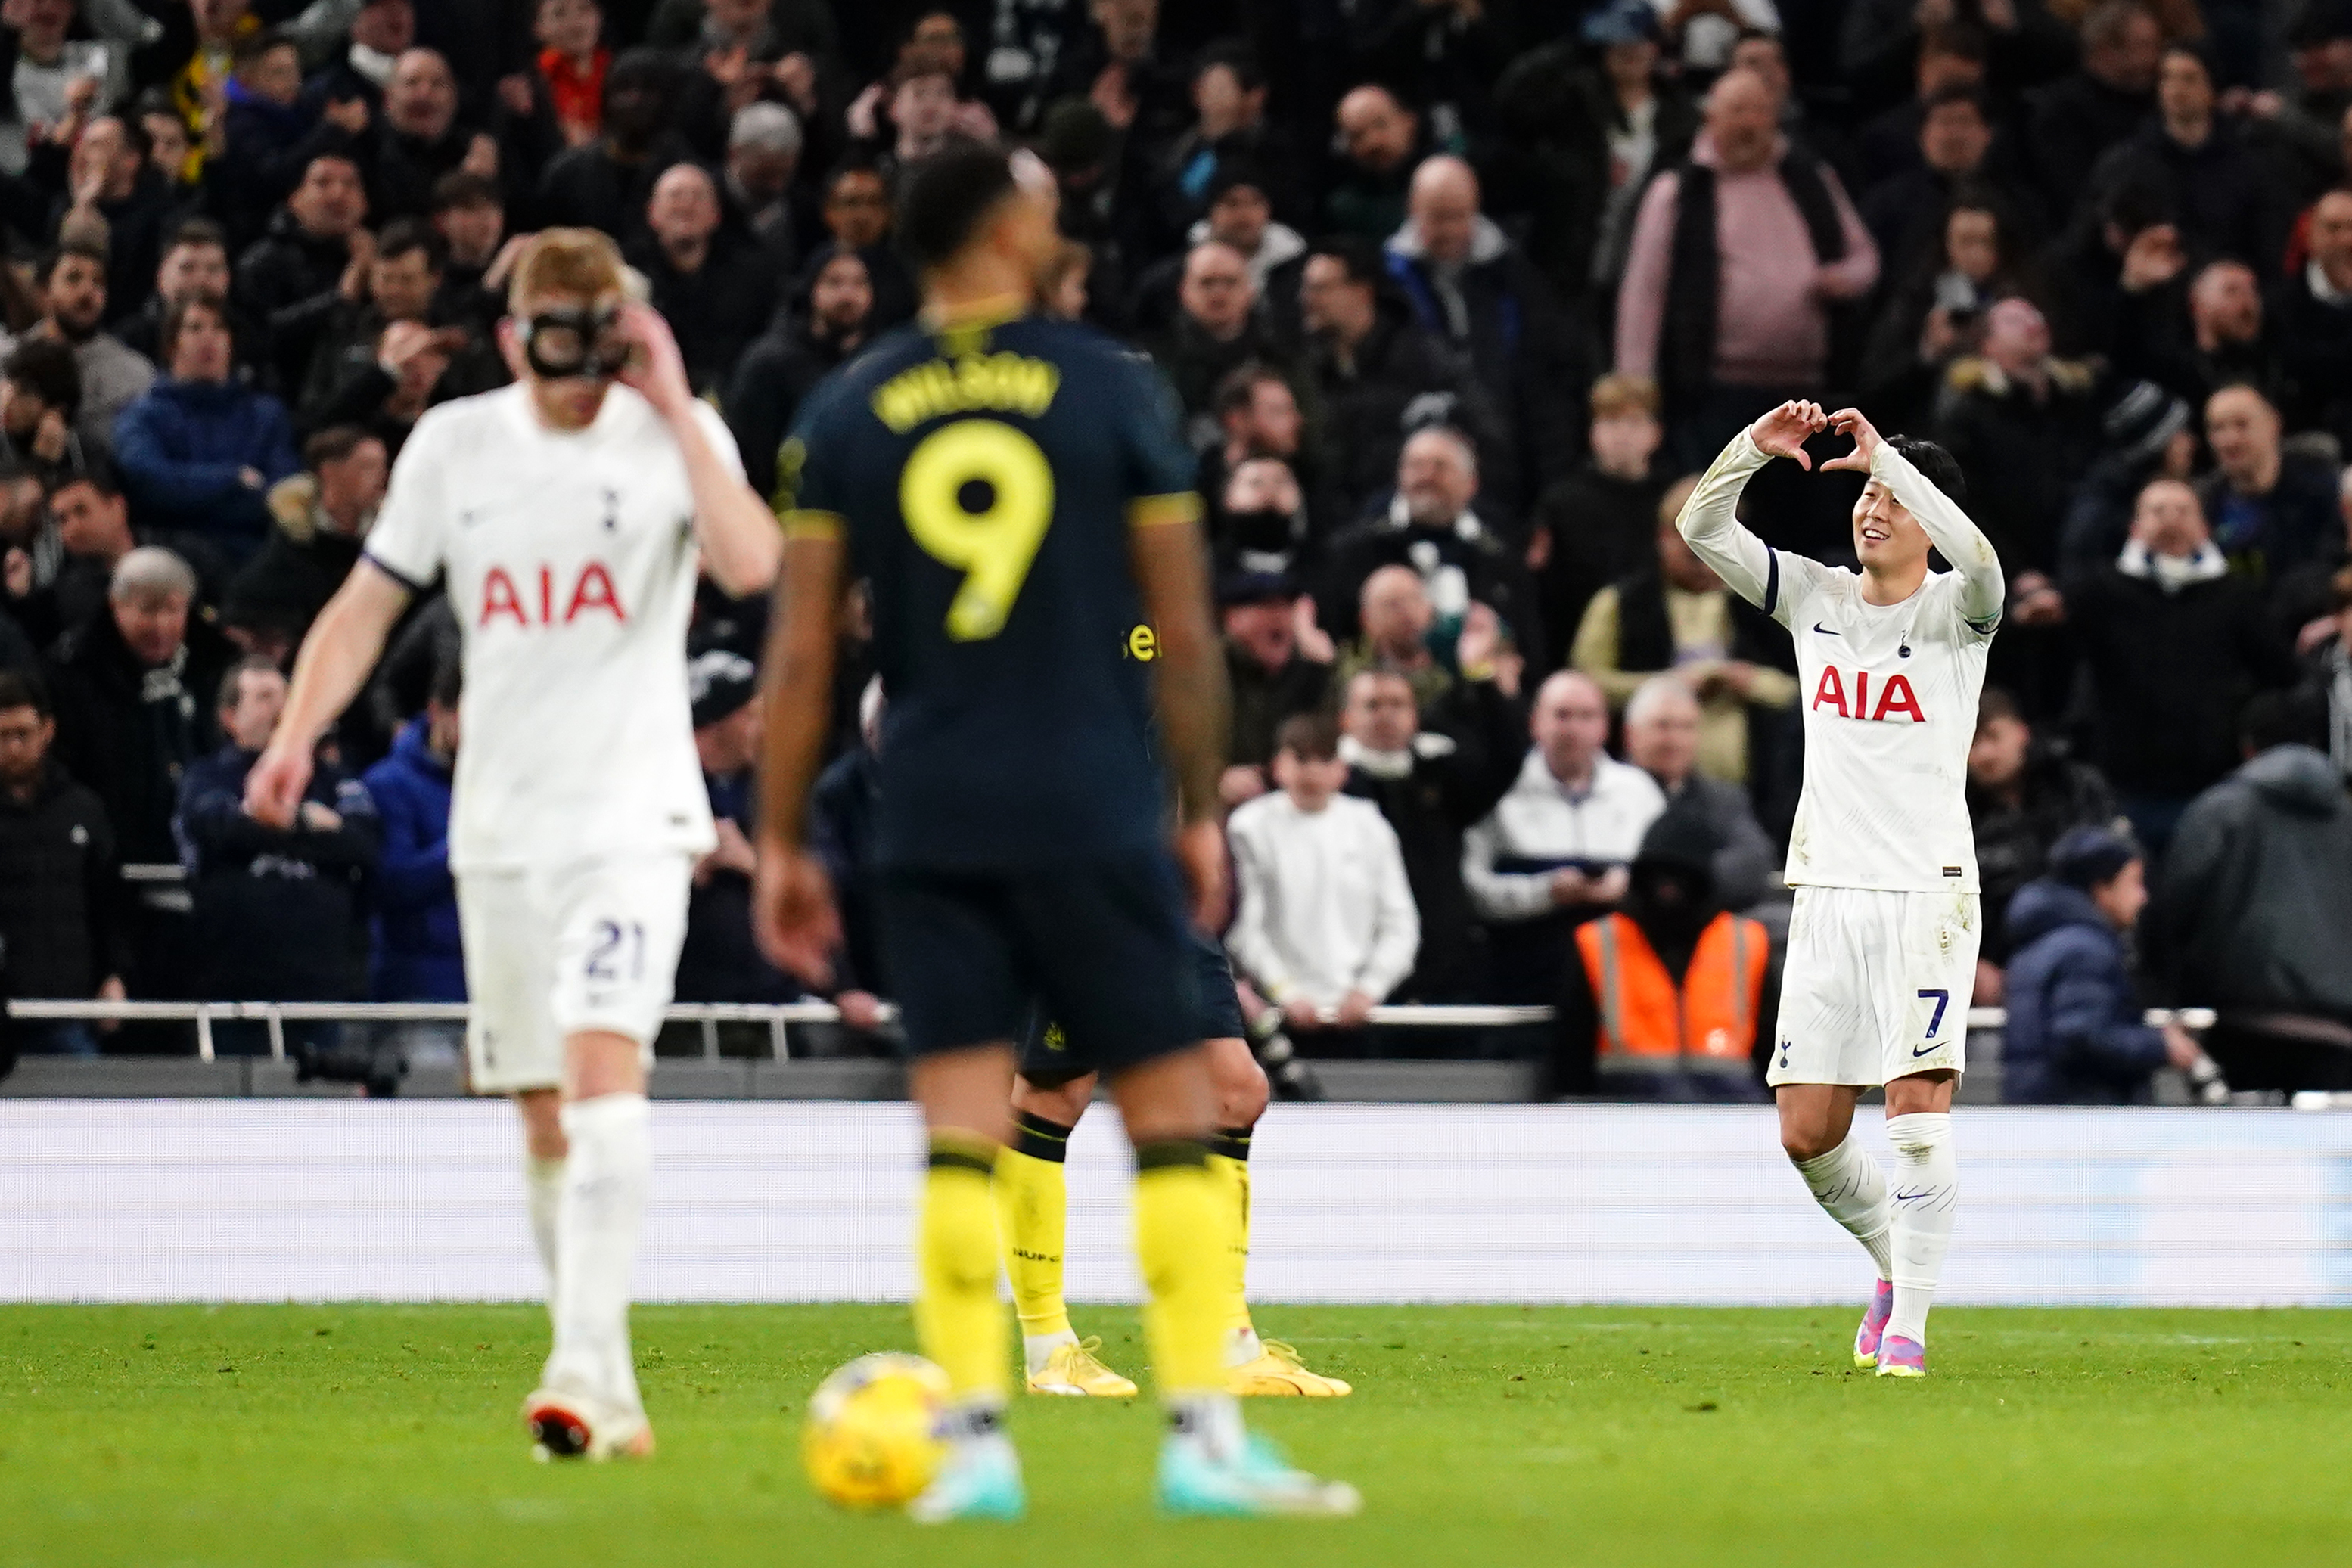 Tottenham sealed their first win in five games